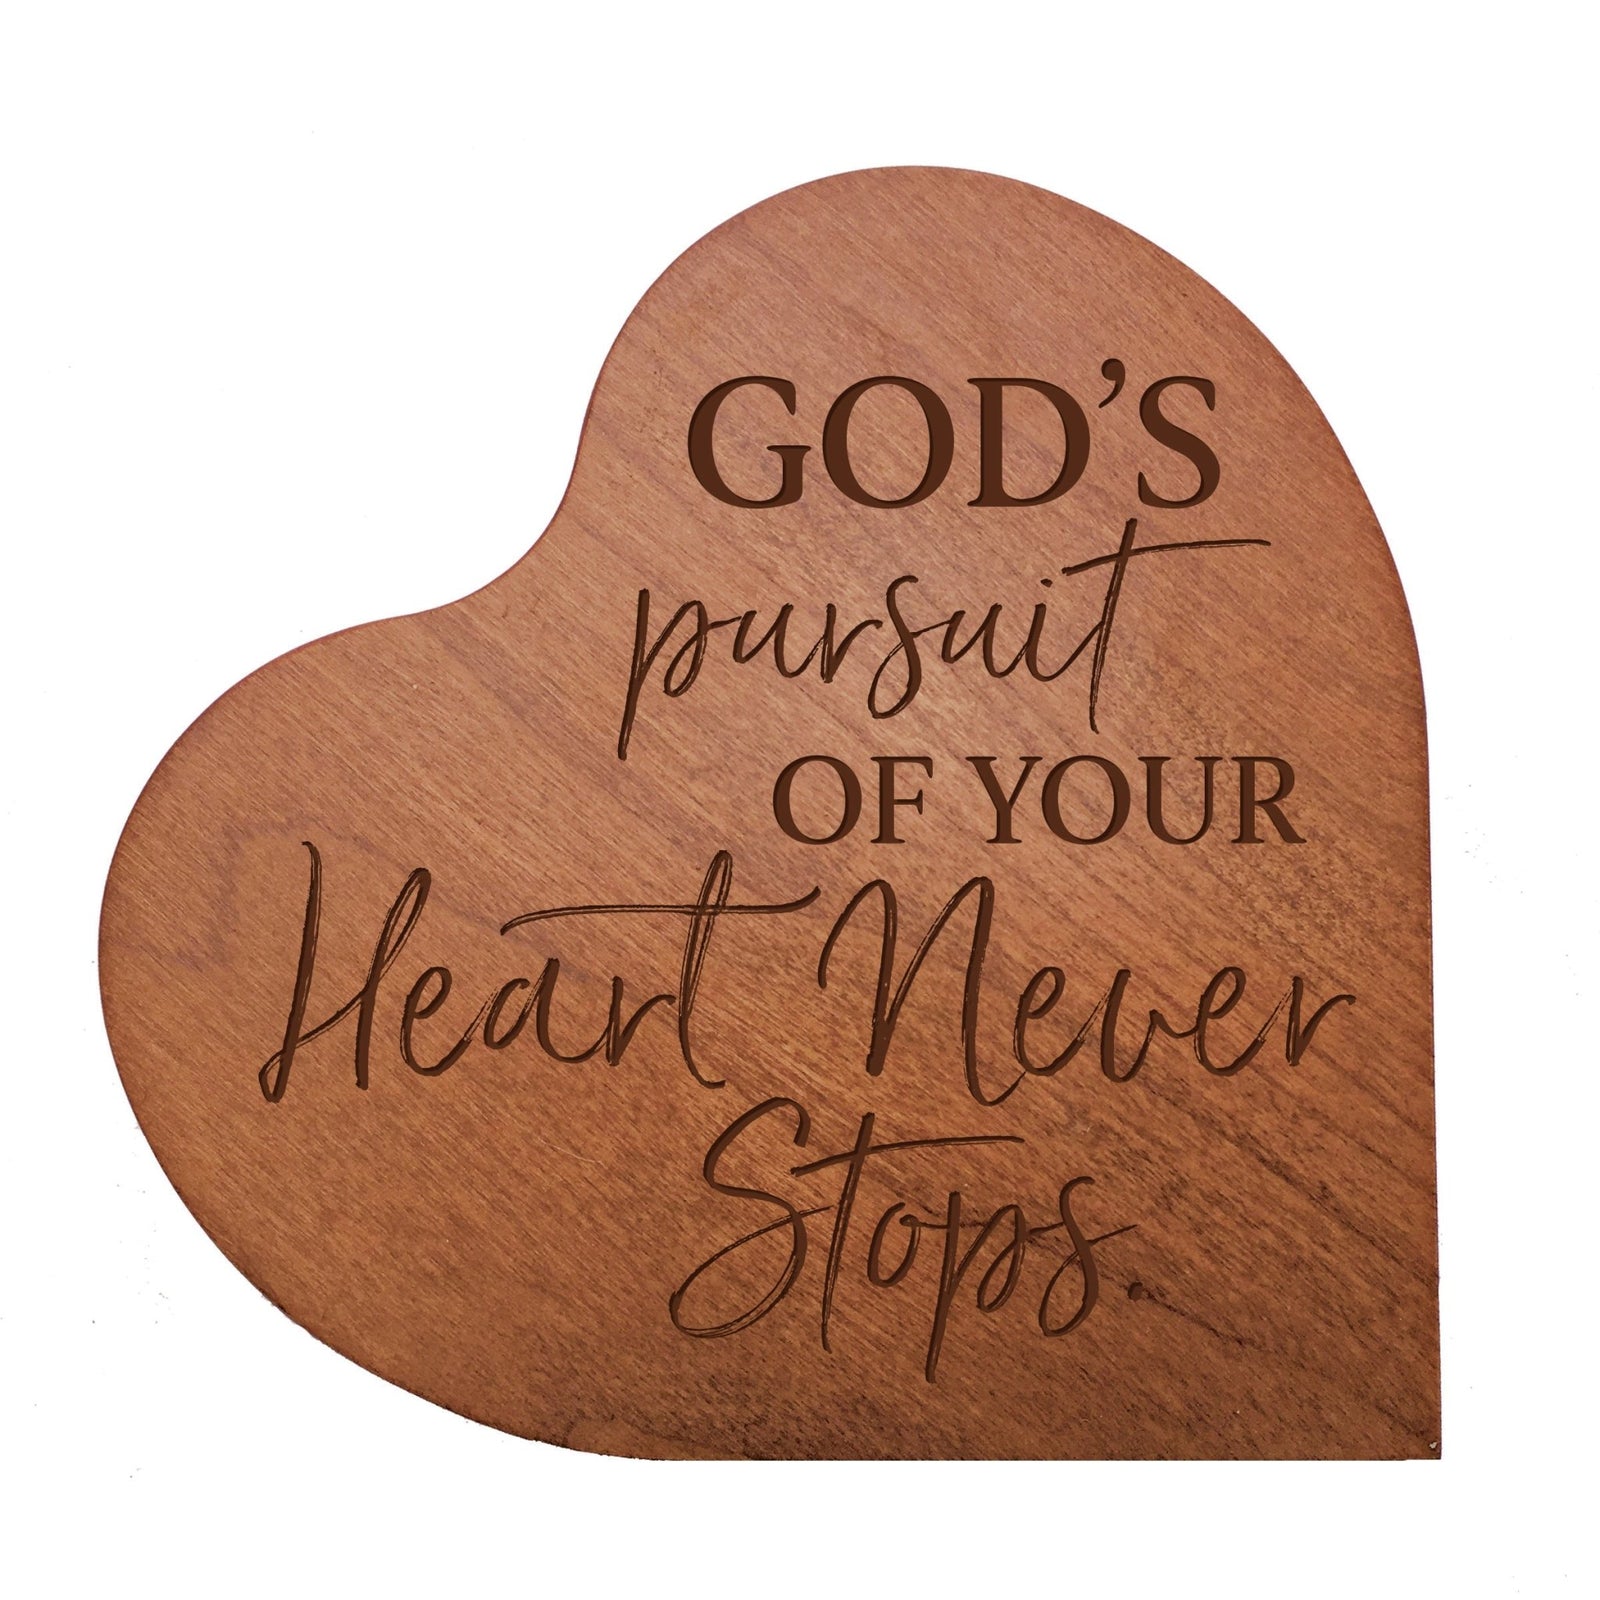 Modern Inspirational Wooden Heart Block For Home Décor - God’s Pursuit - LifeSong Milestones